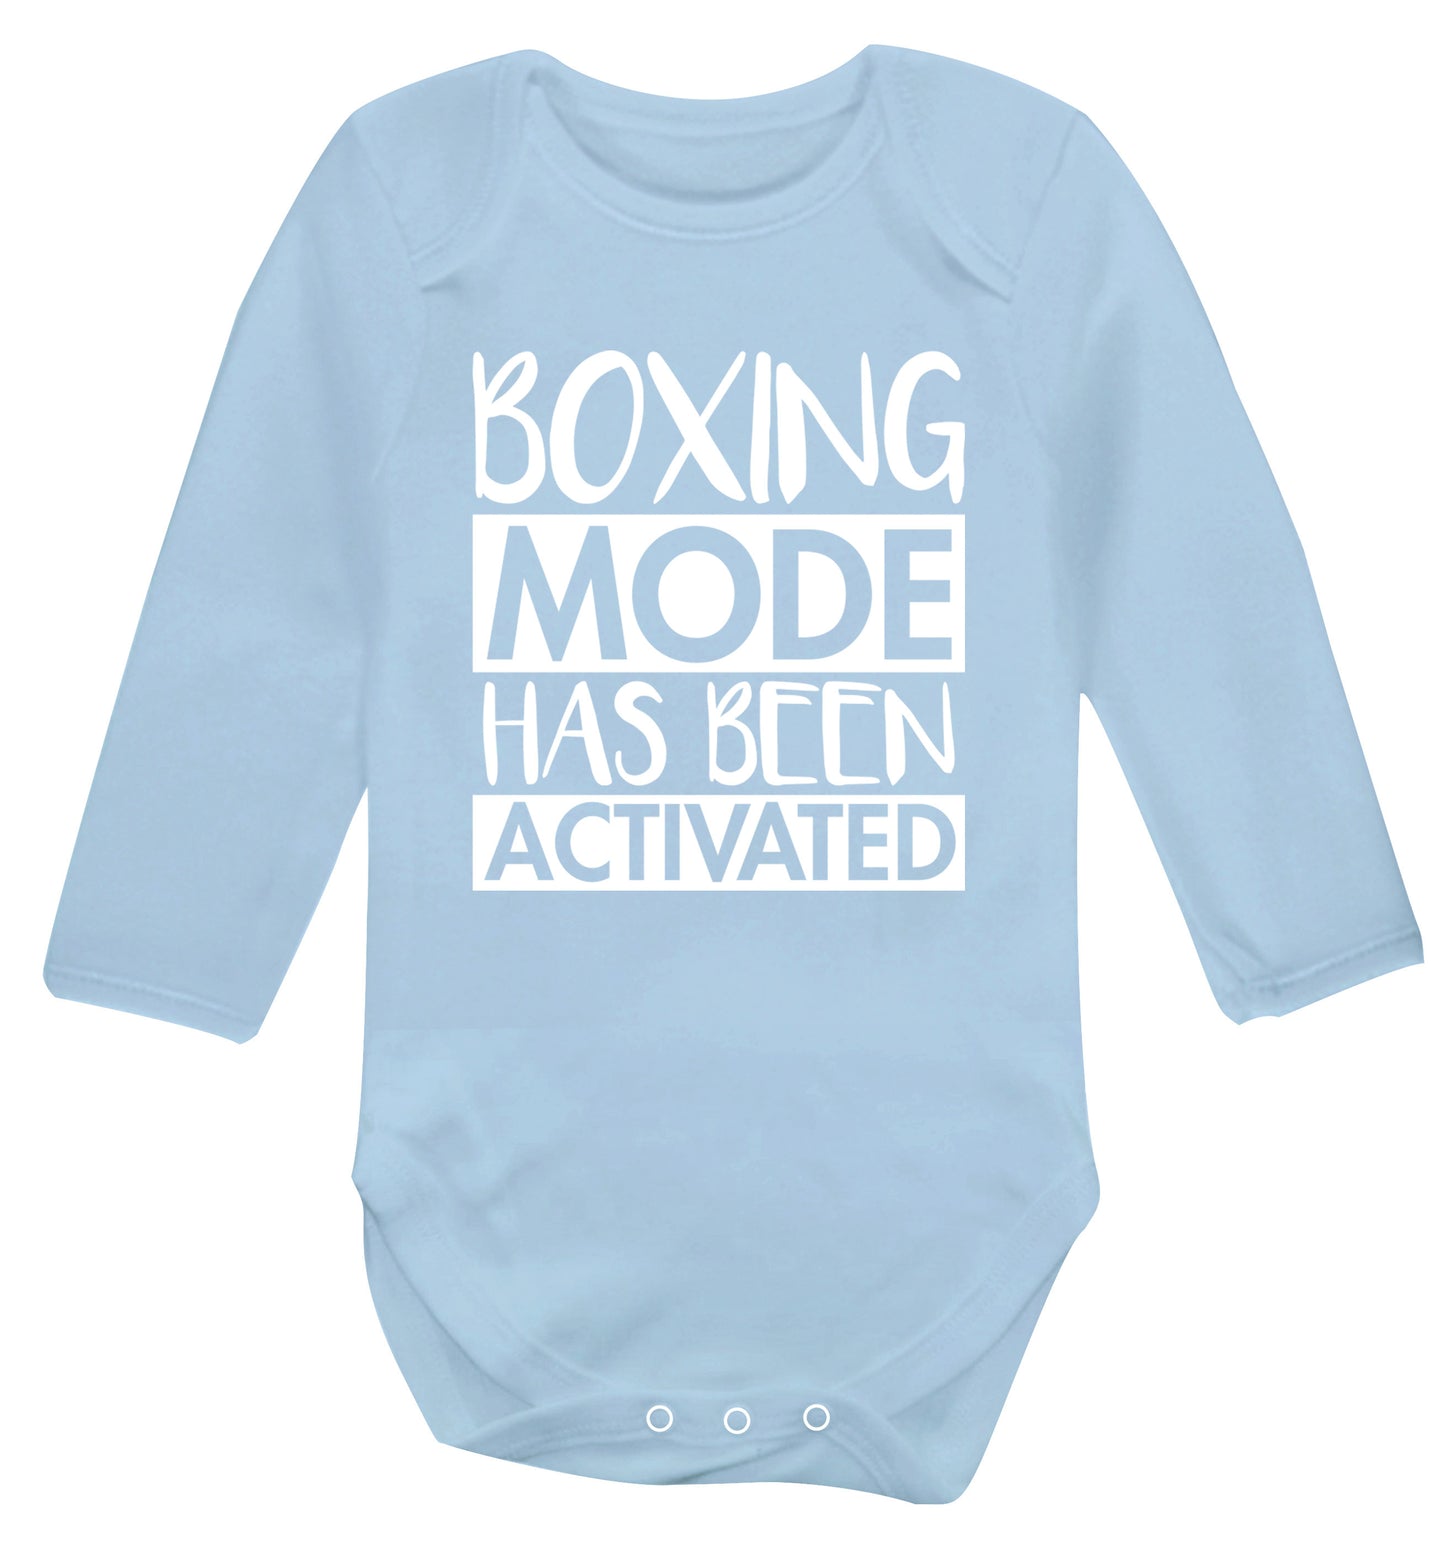 Boxing mode activated Baby Vest long sleeved pale blue 6-12 months